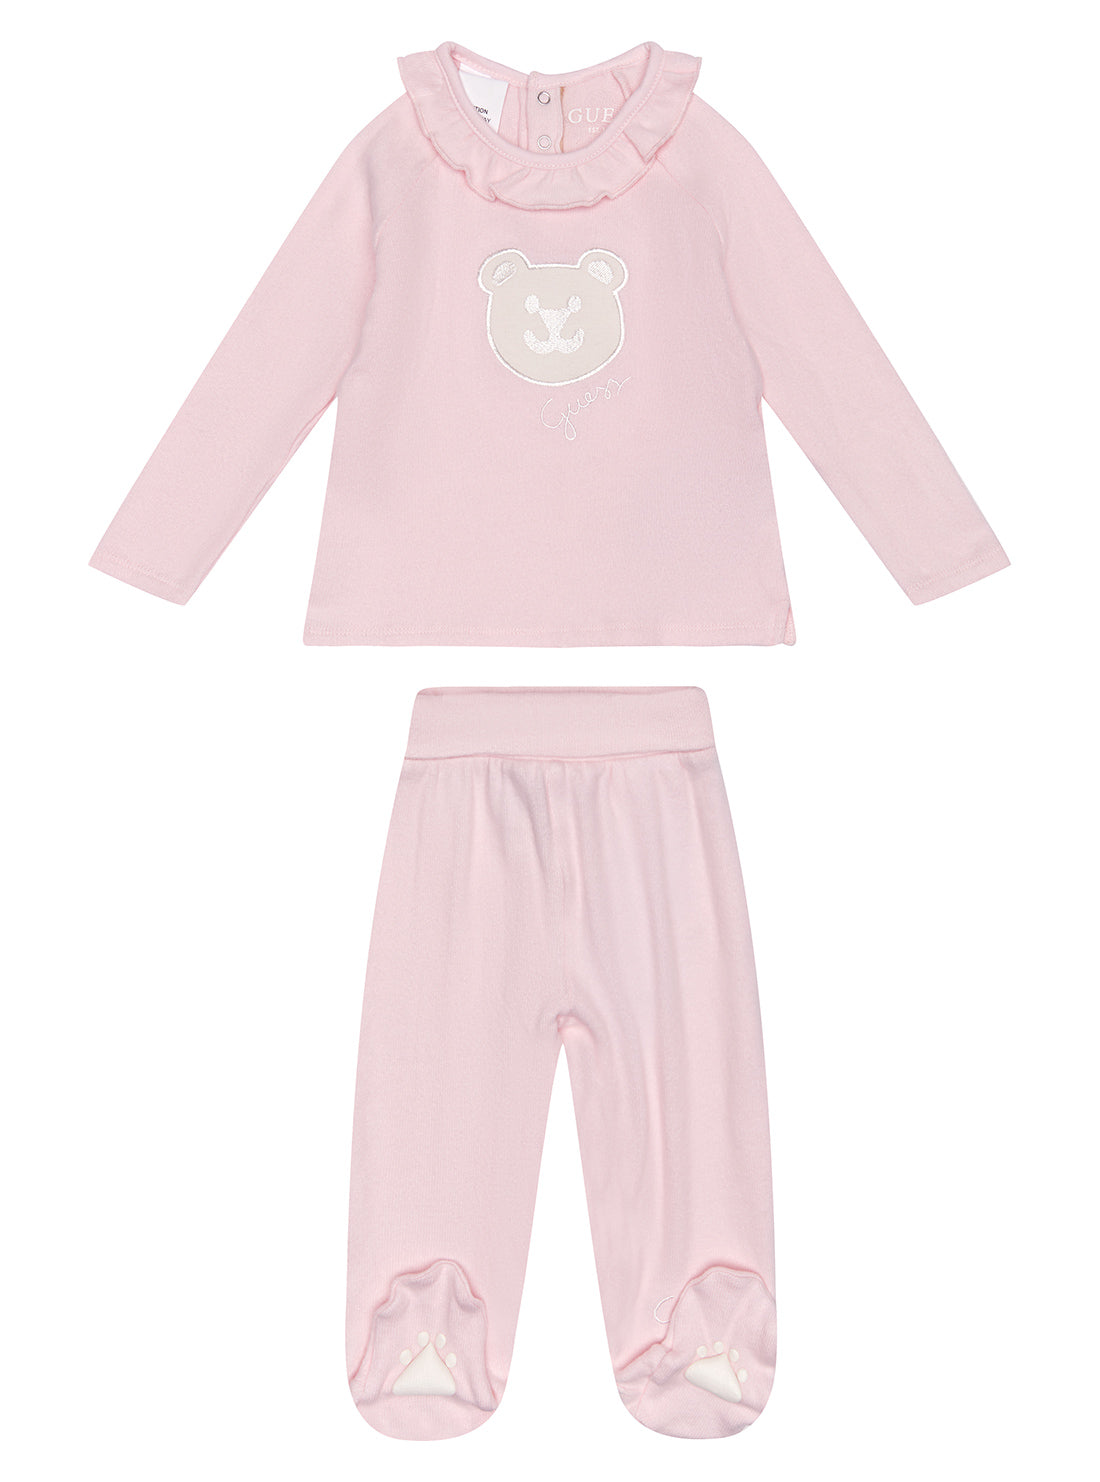 GUESS Pink Top and Pants 2 Piece Set (3-12M) front view